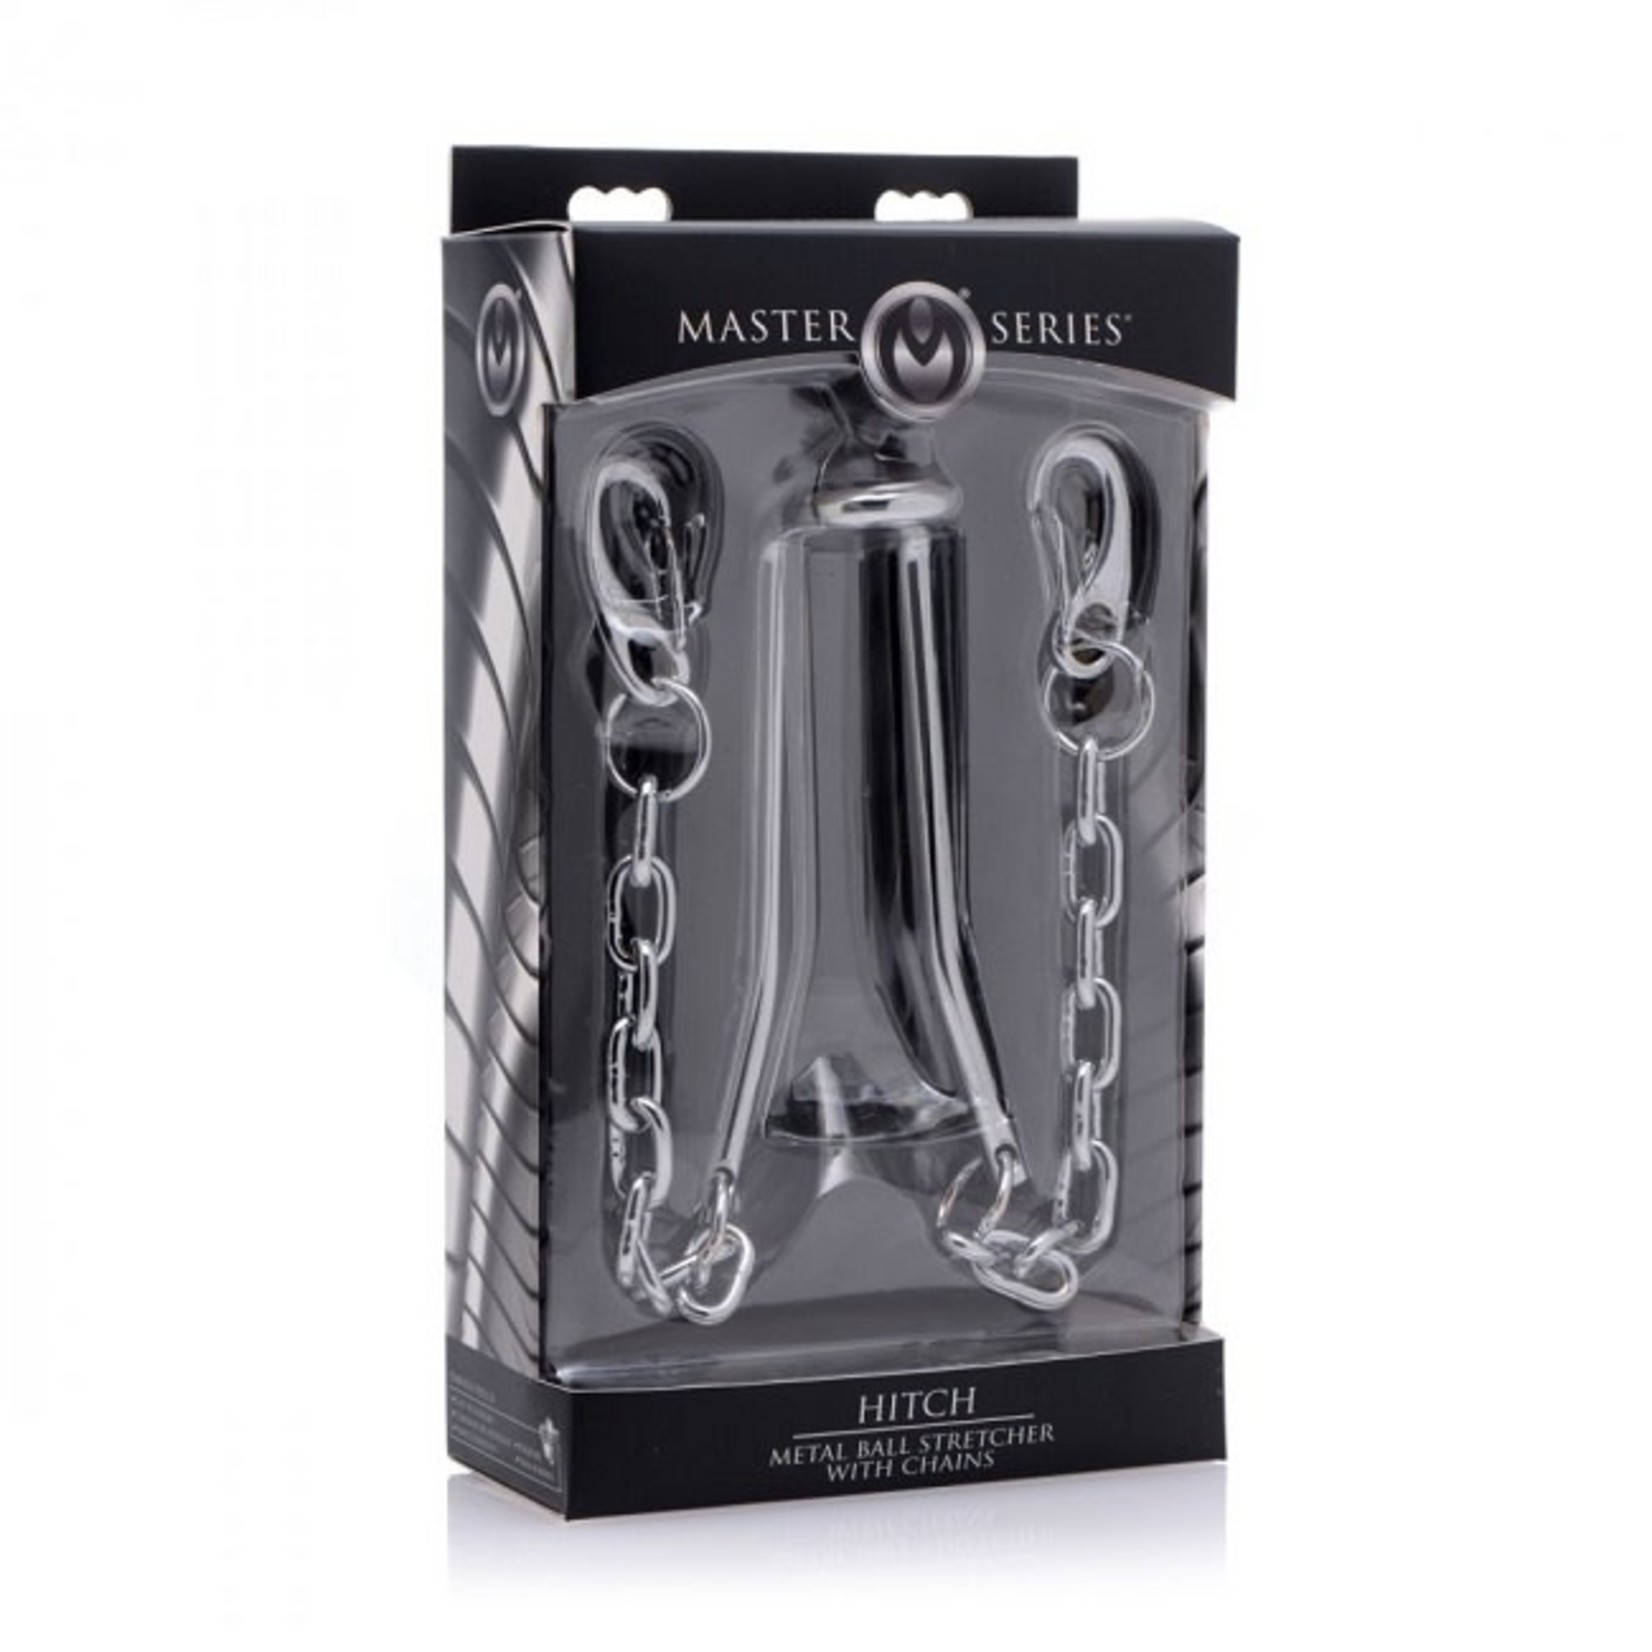 MASTER SERIES MASTER SERIES - HITCH STAINLESS BALL STRETCHER